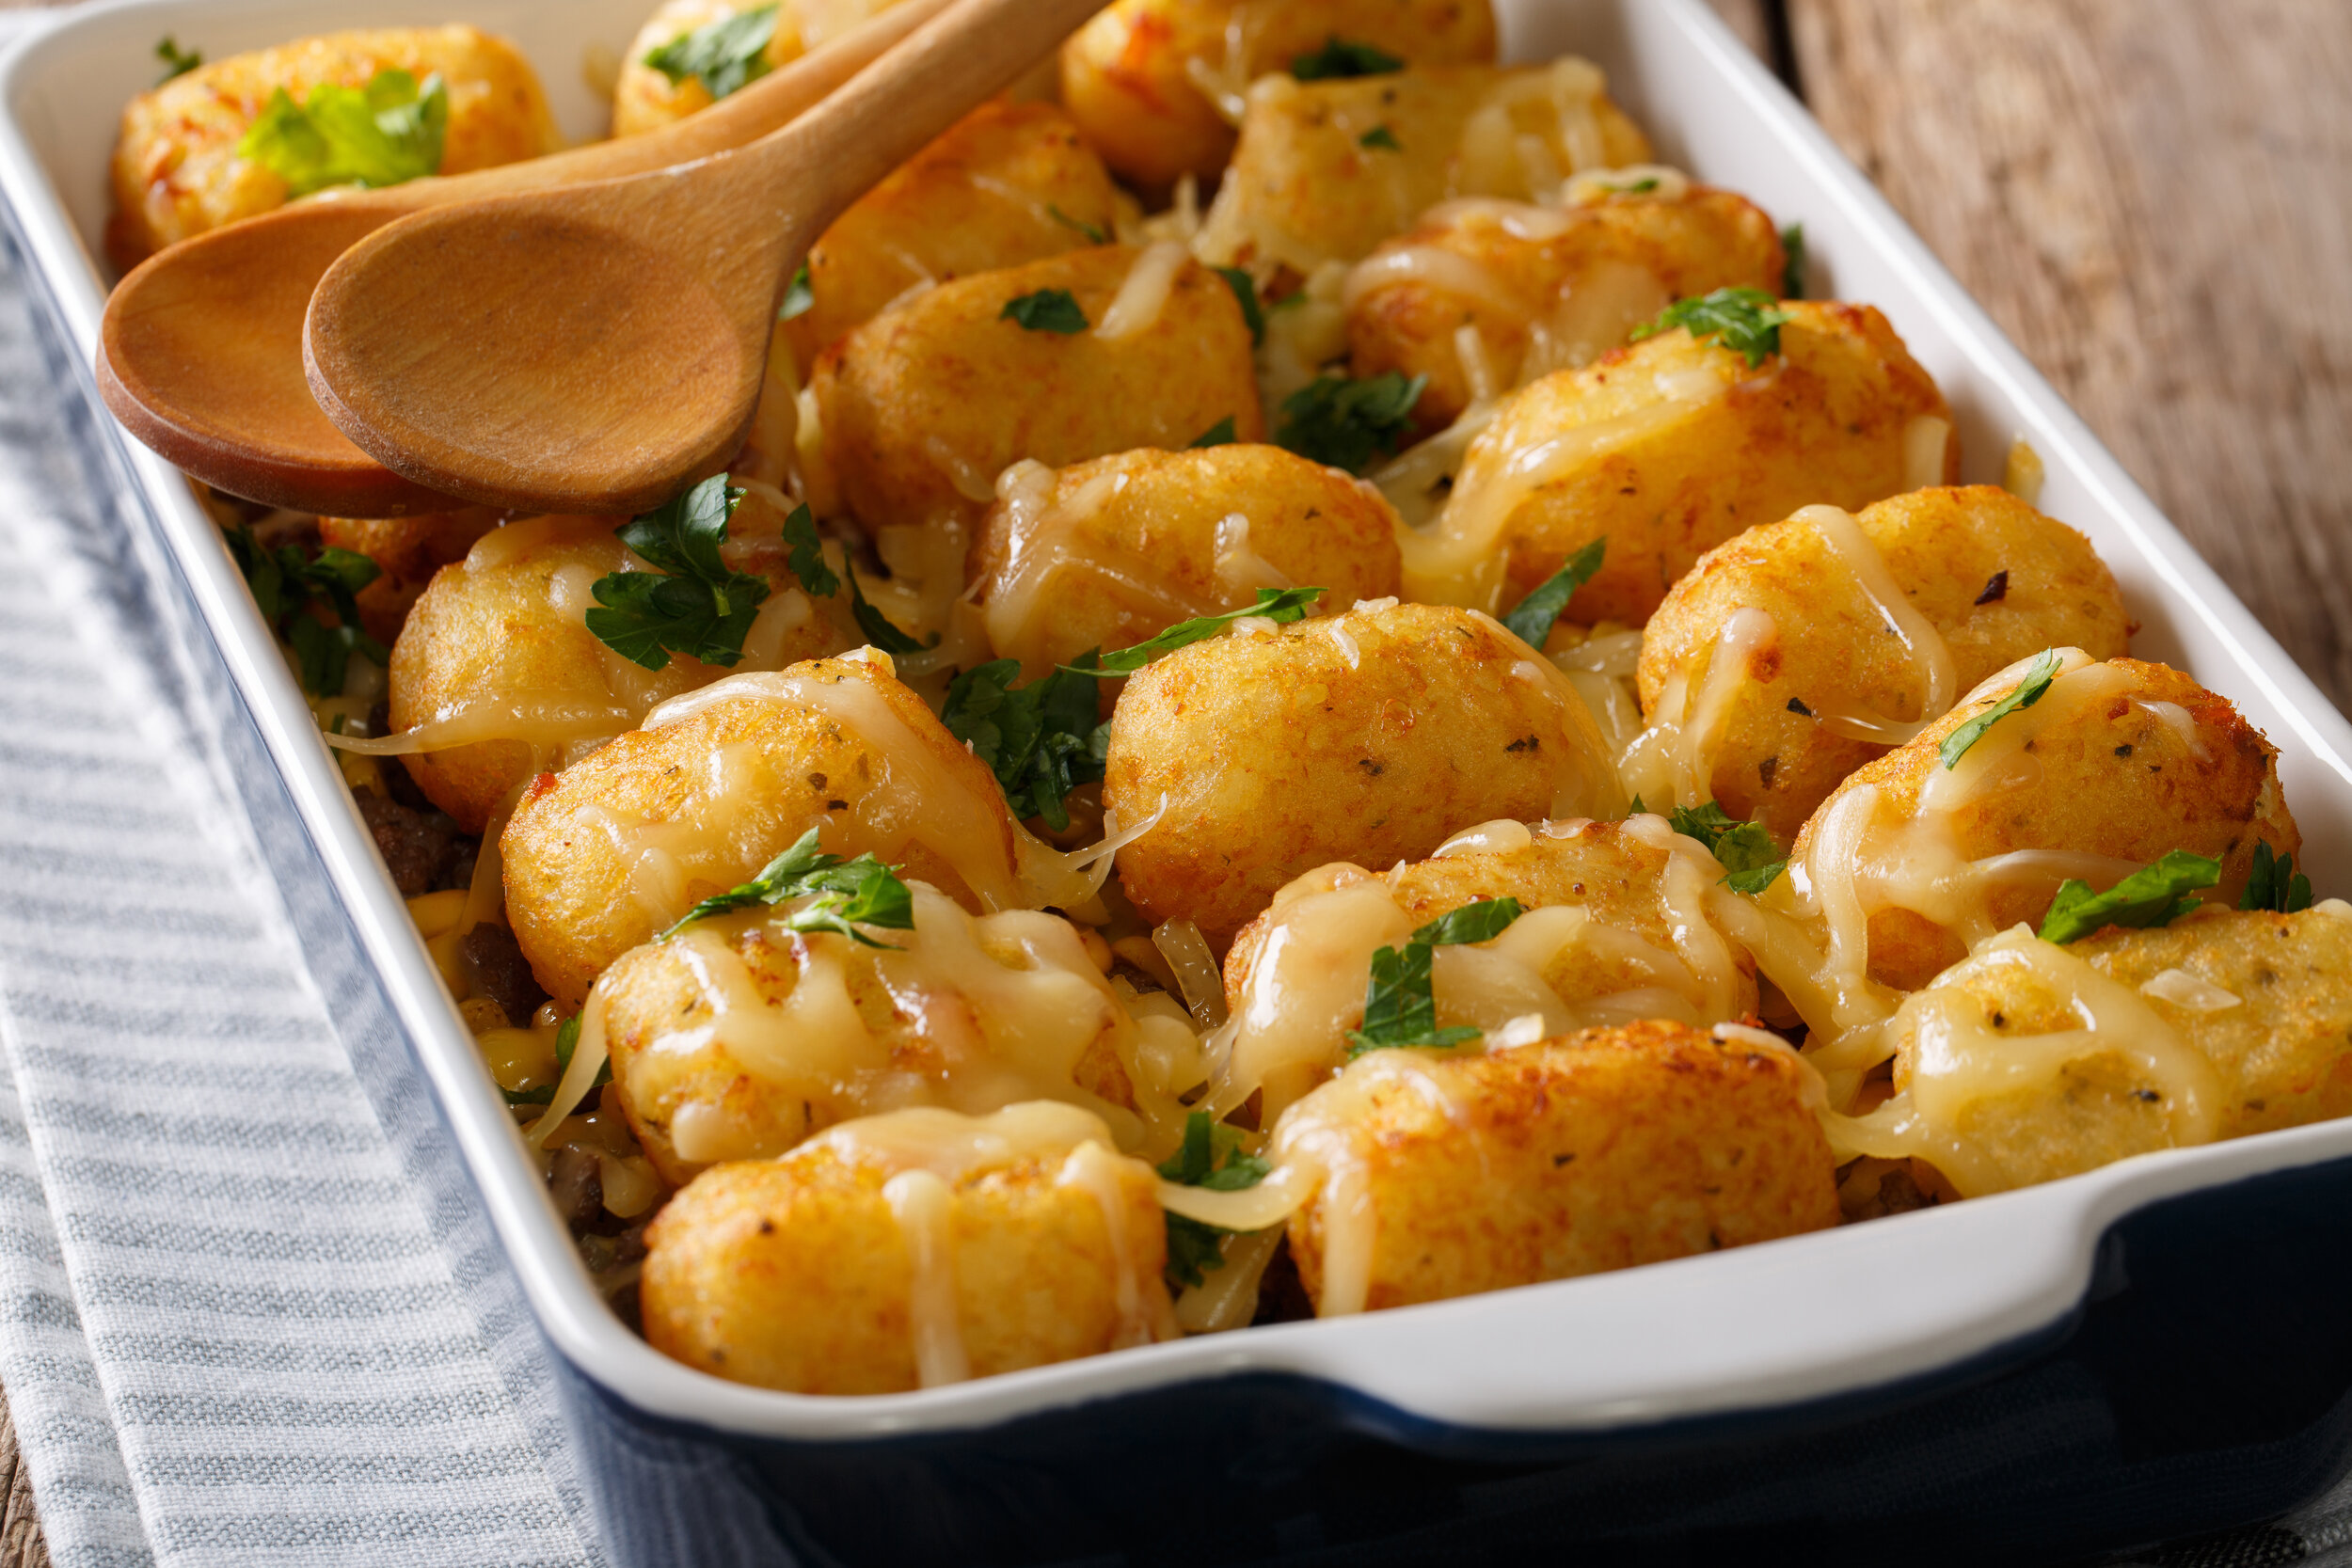 Canva - Hot Baked Tater Tots with cheese, meat, corn and parsley close-up in on the table. horizontal.jpg